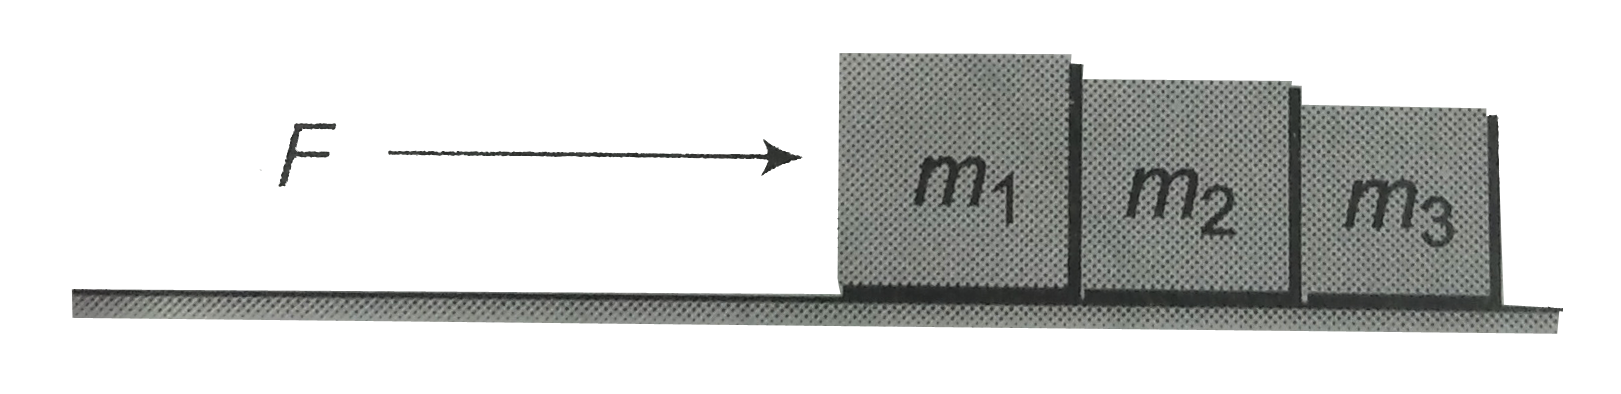 Three block of masses m(1),m(2) and m(3) kg are placed in contact with each other on a frictionless table. A force F is applied on the heaviest mass m(1), the acceleration of m(2) will be